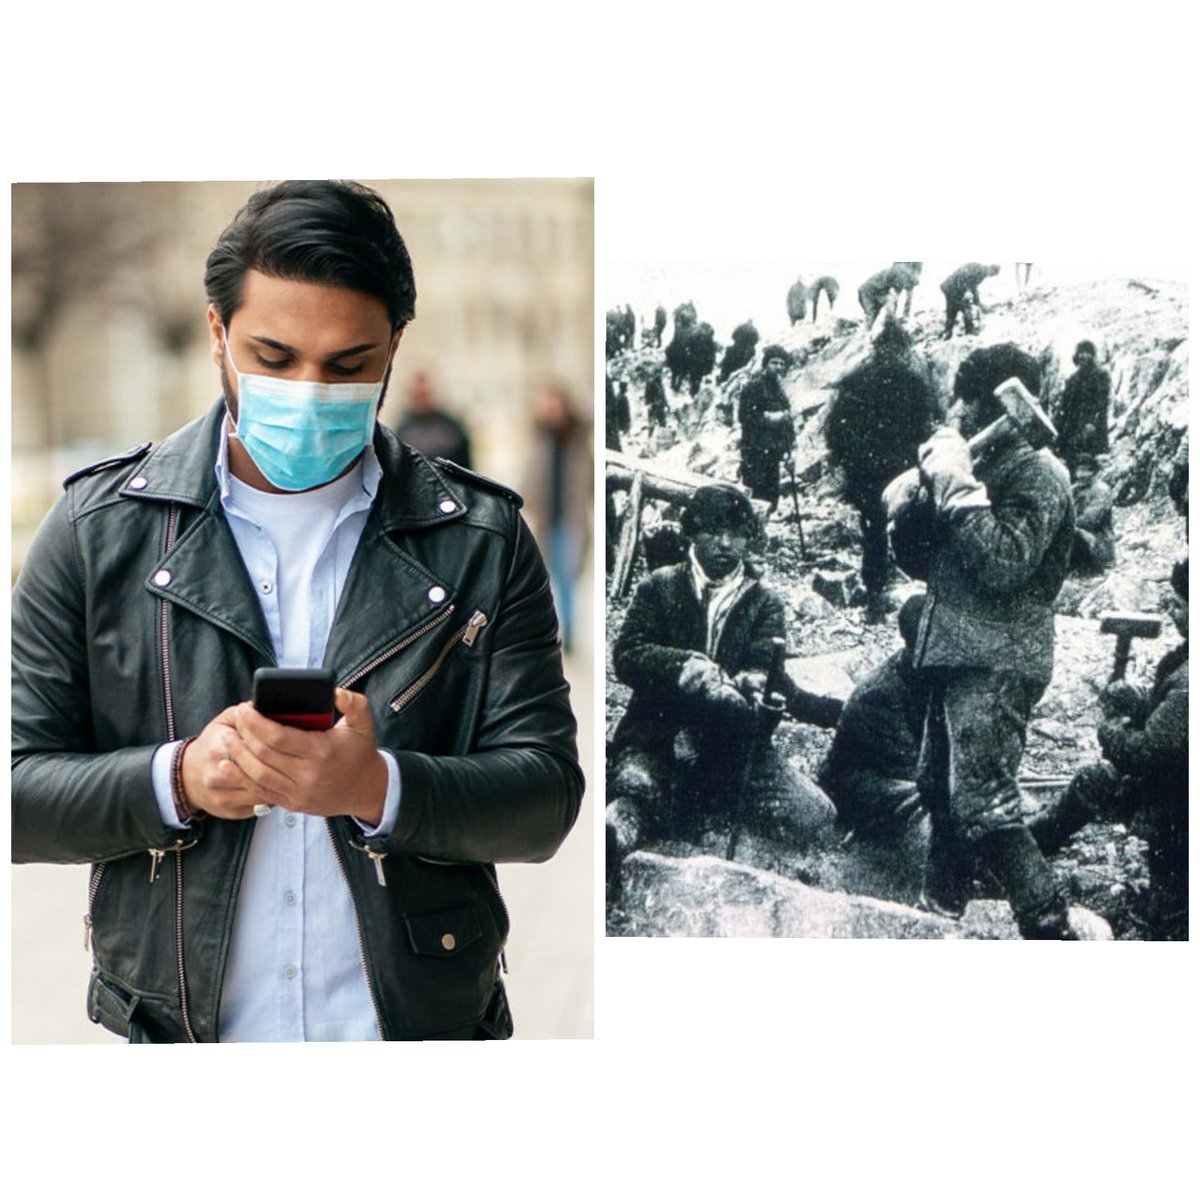 Left pic: man wearing jacket on his smartphone, wearing a mask.Right pic: falsely accused people in a Soviet gulag.Note: the people on the right were worked to death. This is tyranny and oppression.